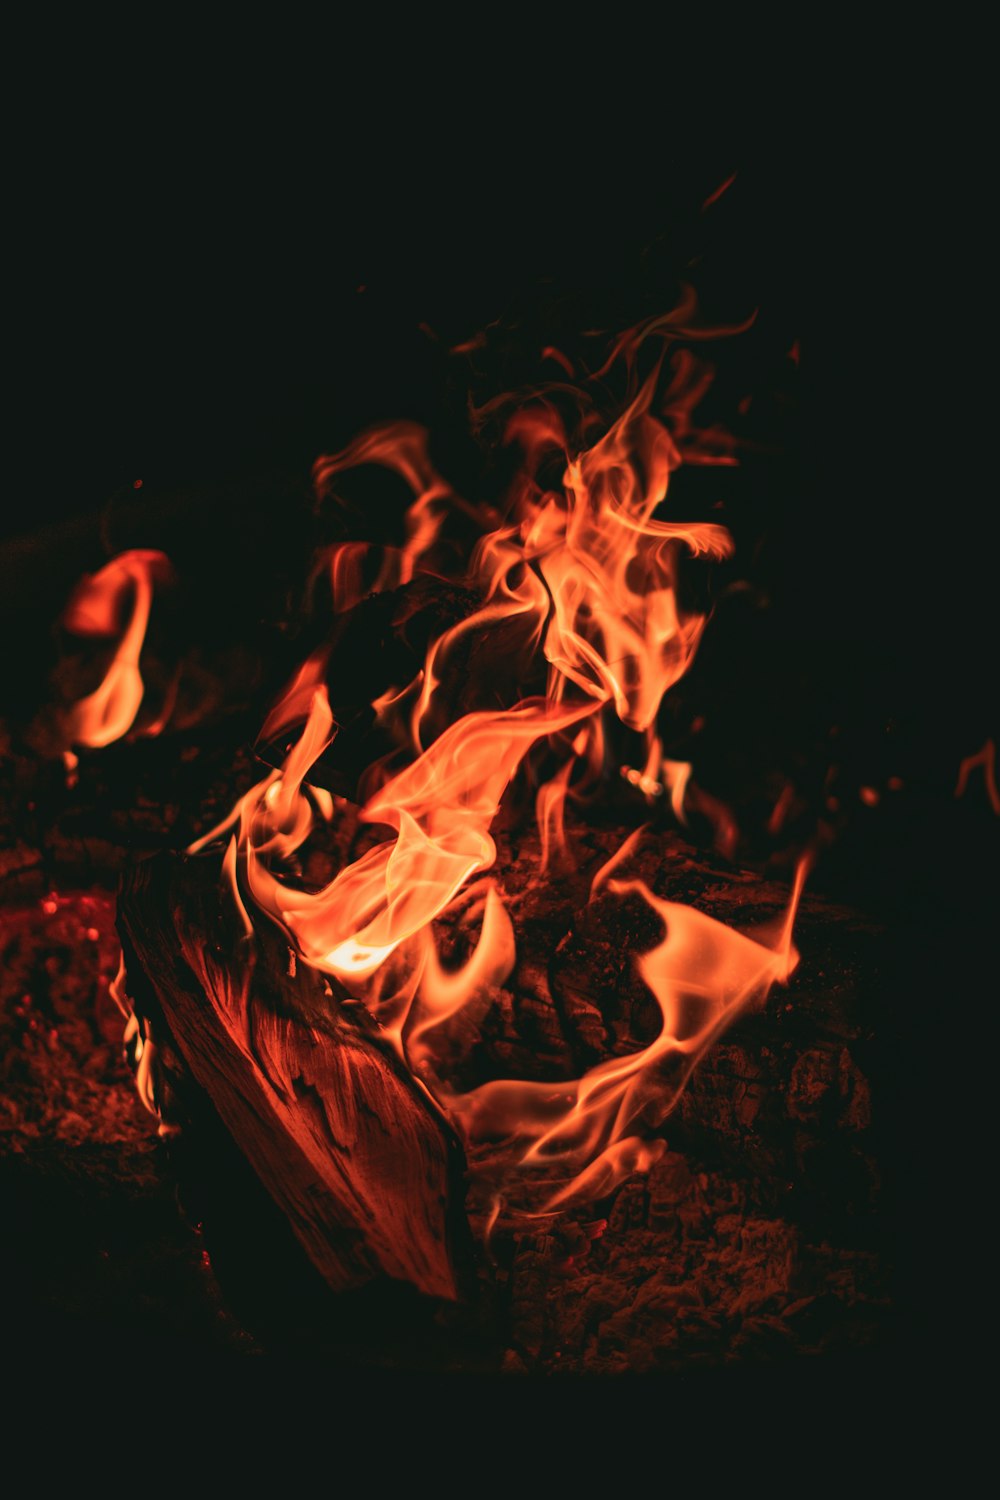 fire in the dark during night time